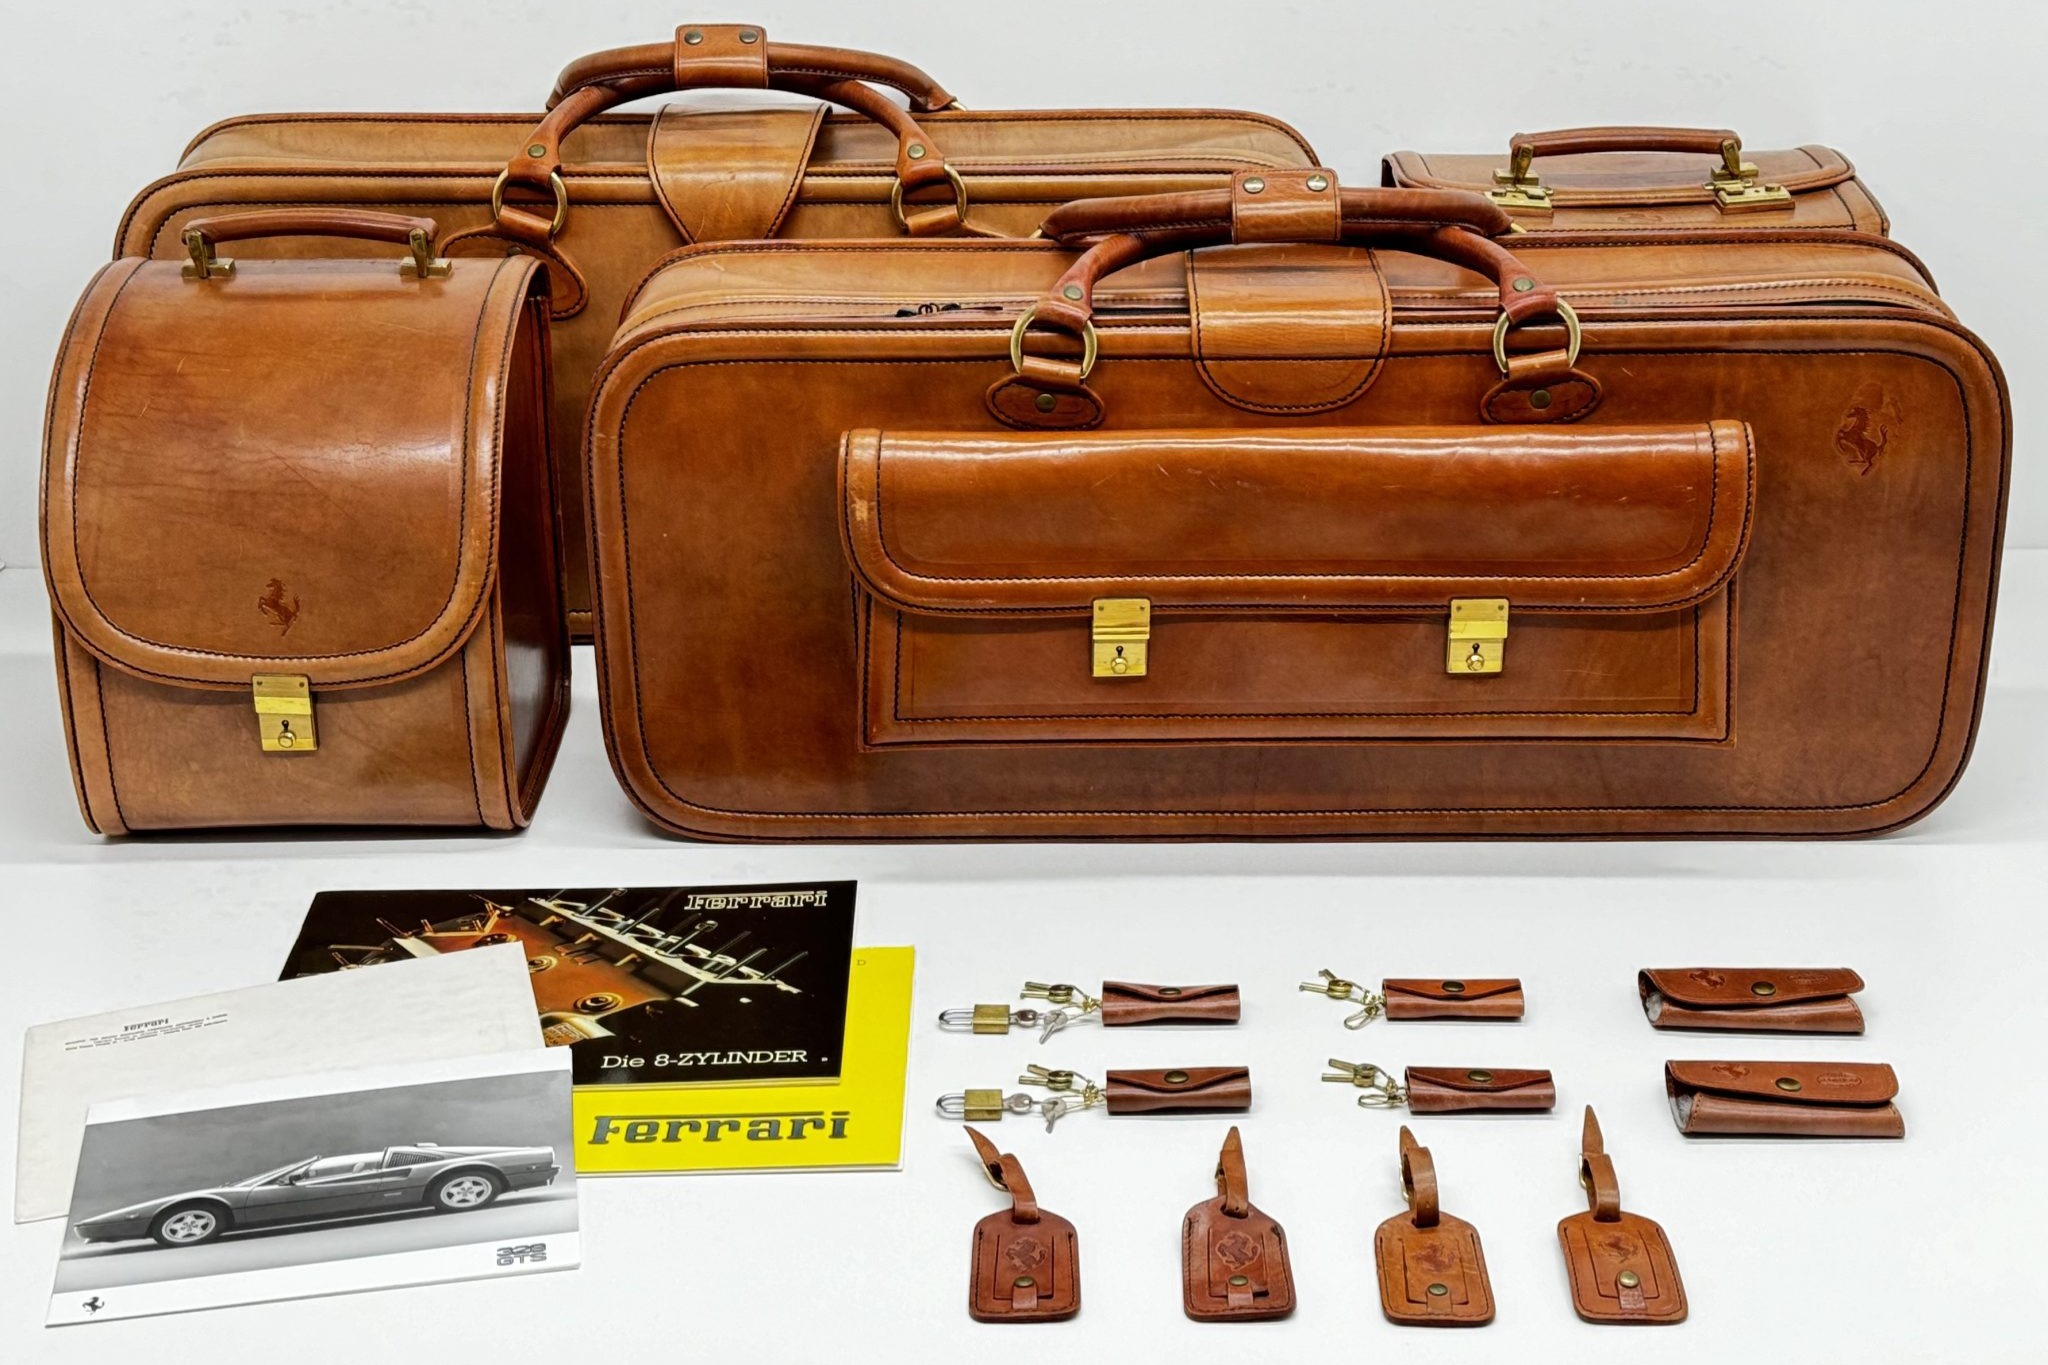 Used Four-Piece Ferrari 328 Luggage Set by Schedoni Review